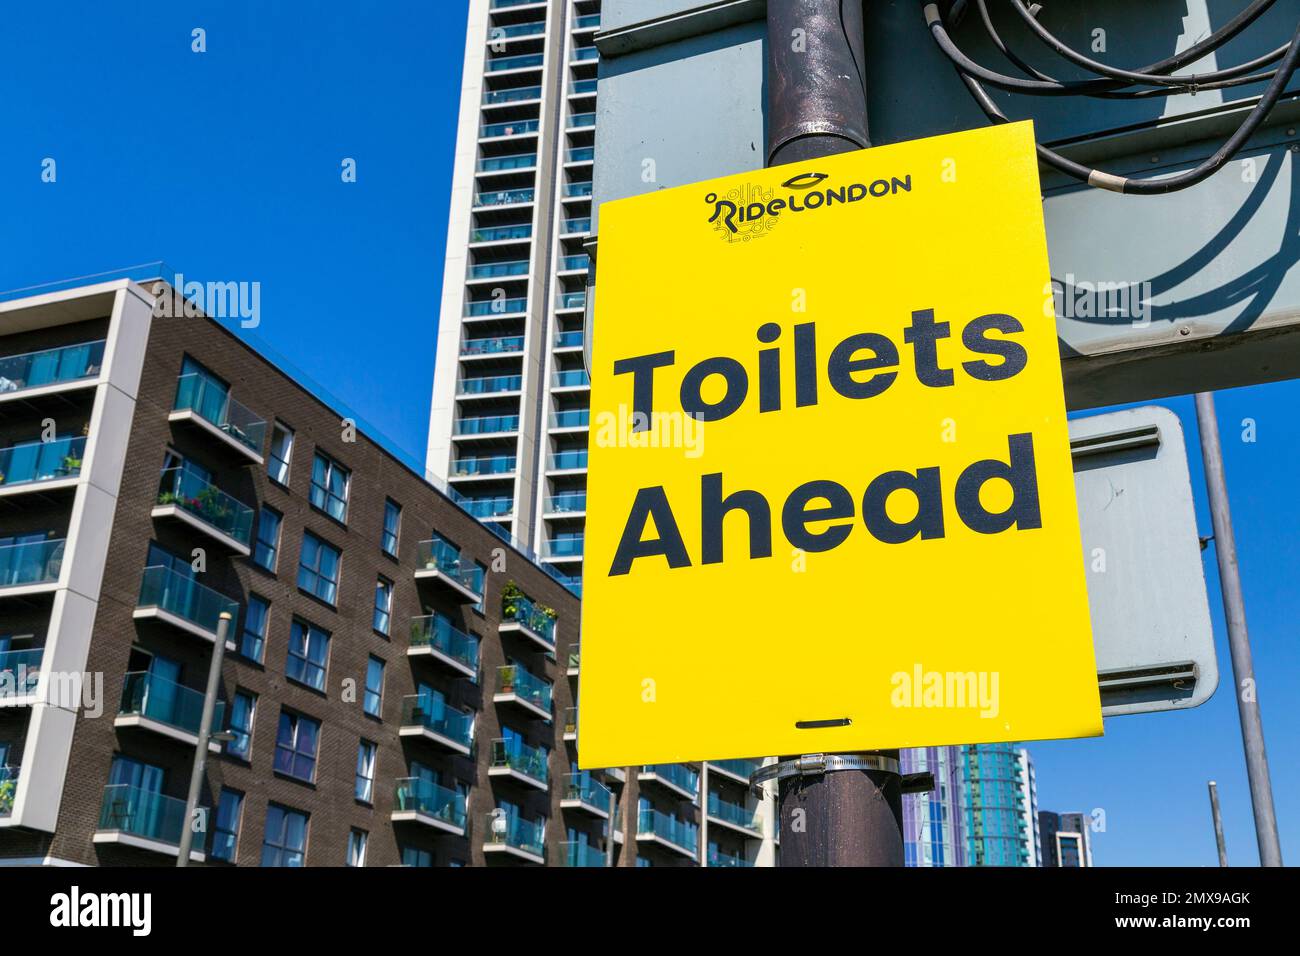 Yellow toilets ahead sign (for RideLondon cycling festival) Stock Photo